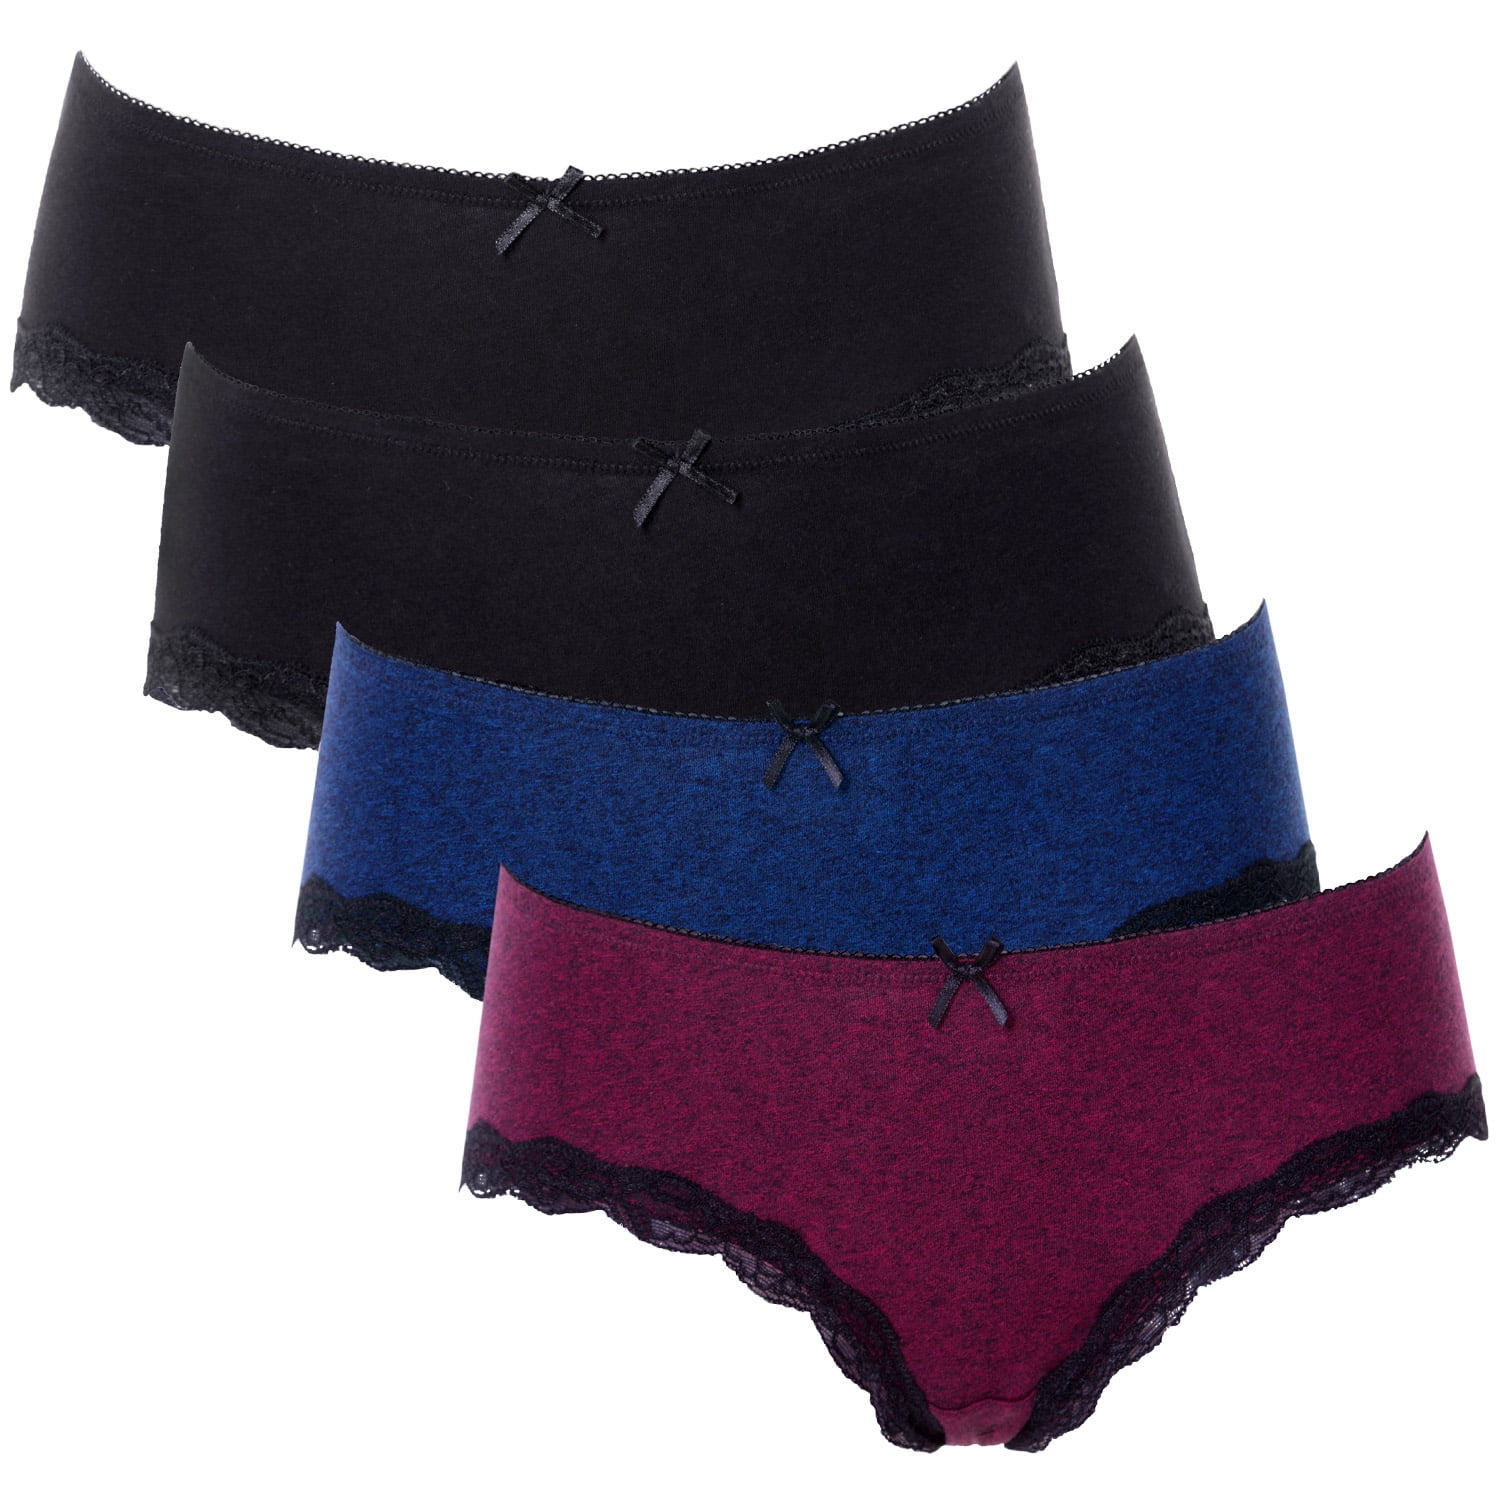 Charmo Women's Cotton Underwear Soft Stretch Hipster Hollow out Panties  Packs of 5 